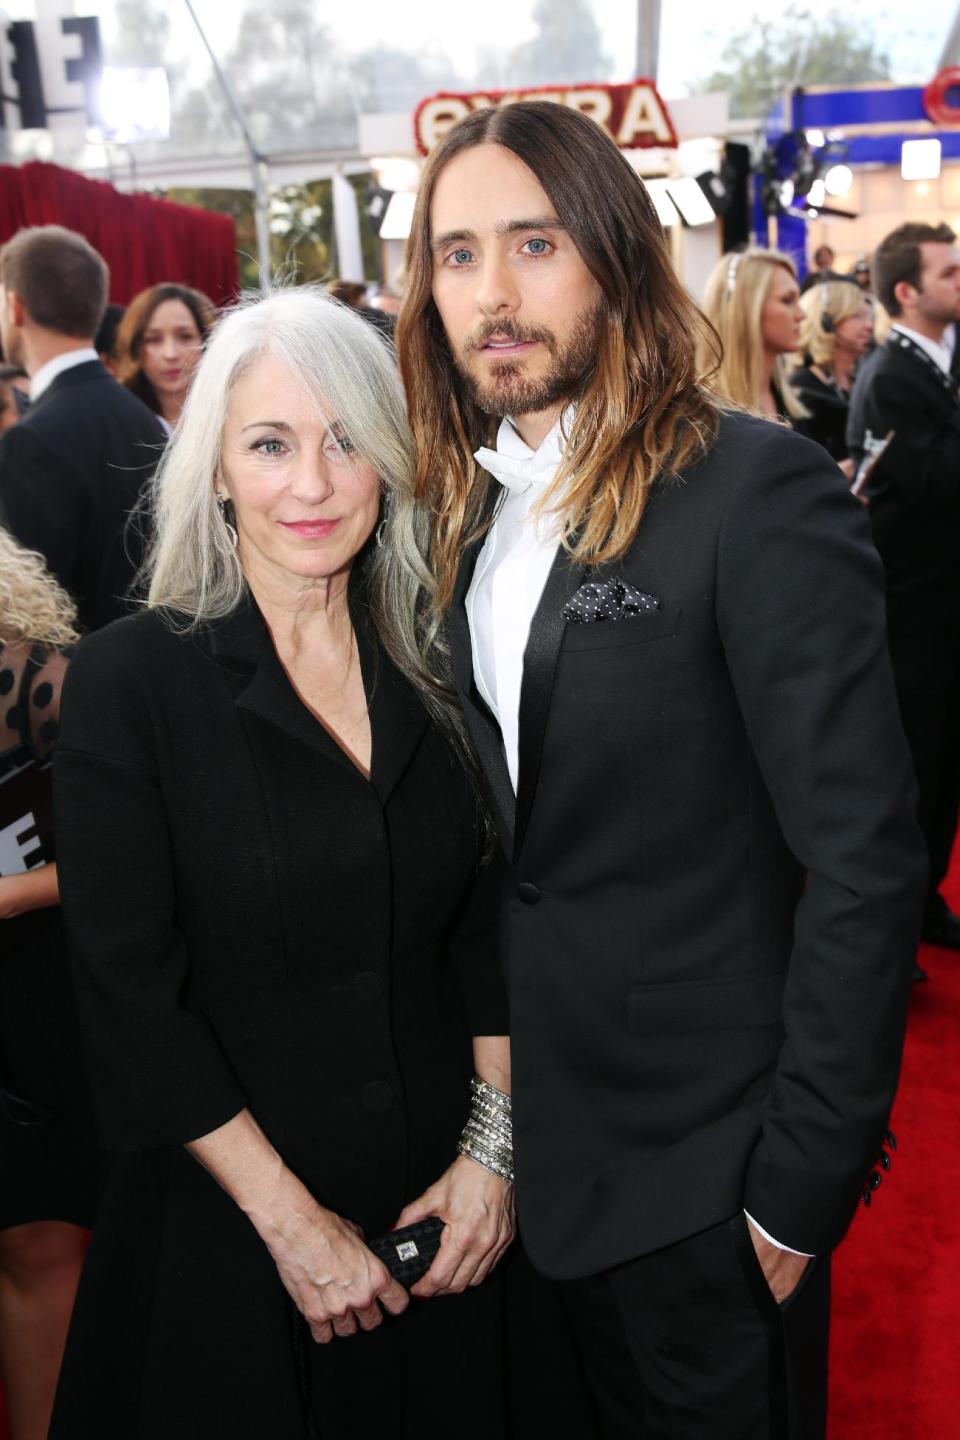 Constance Leto and Jared Leto arrive at the 20th annual Screen Actors Guild Awards at the Shrine Auditorium on Saturday, Jan. 18, 2014, in Los Angeles. (Photo by Matt Sayles/Invision/AP)